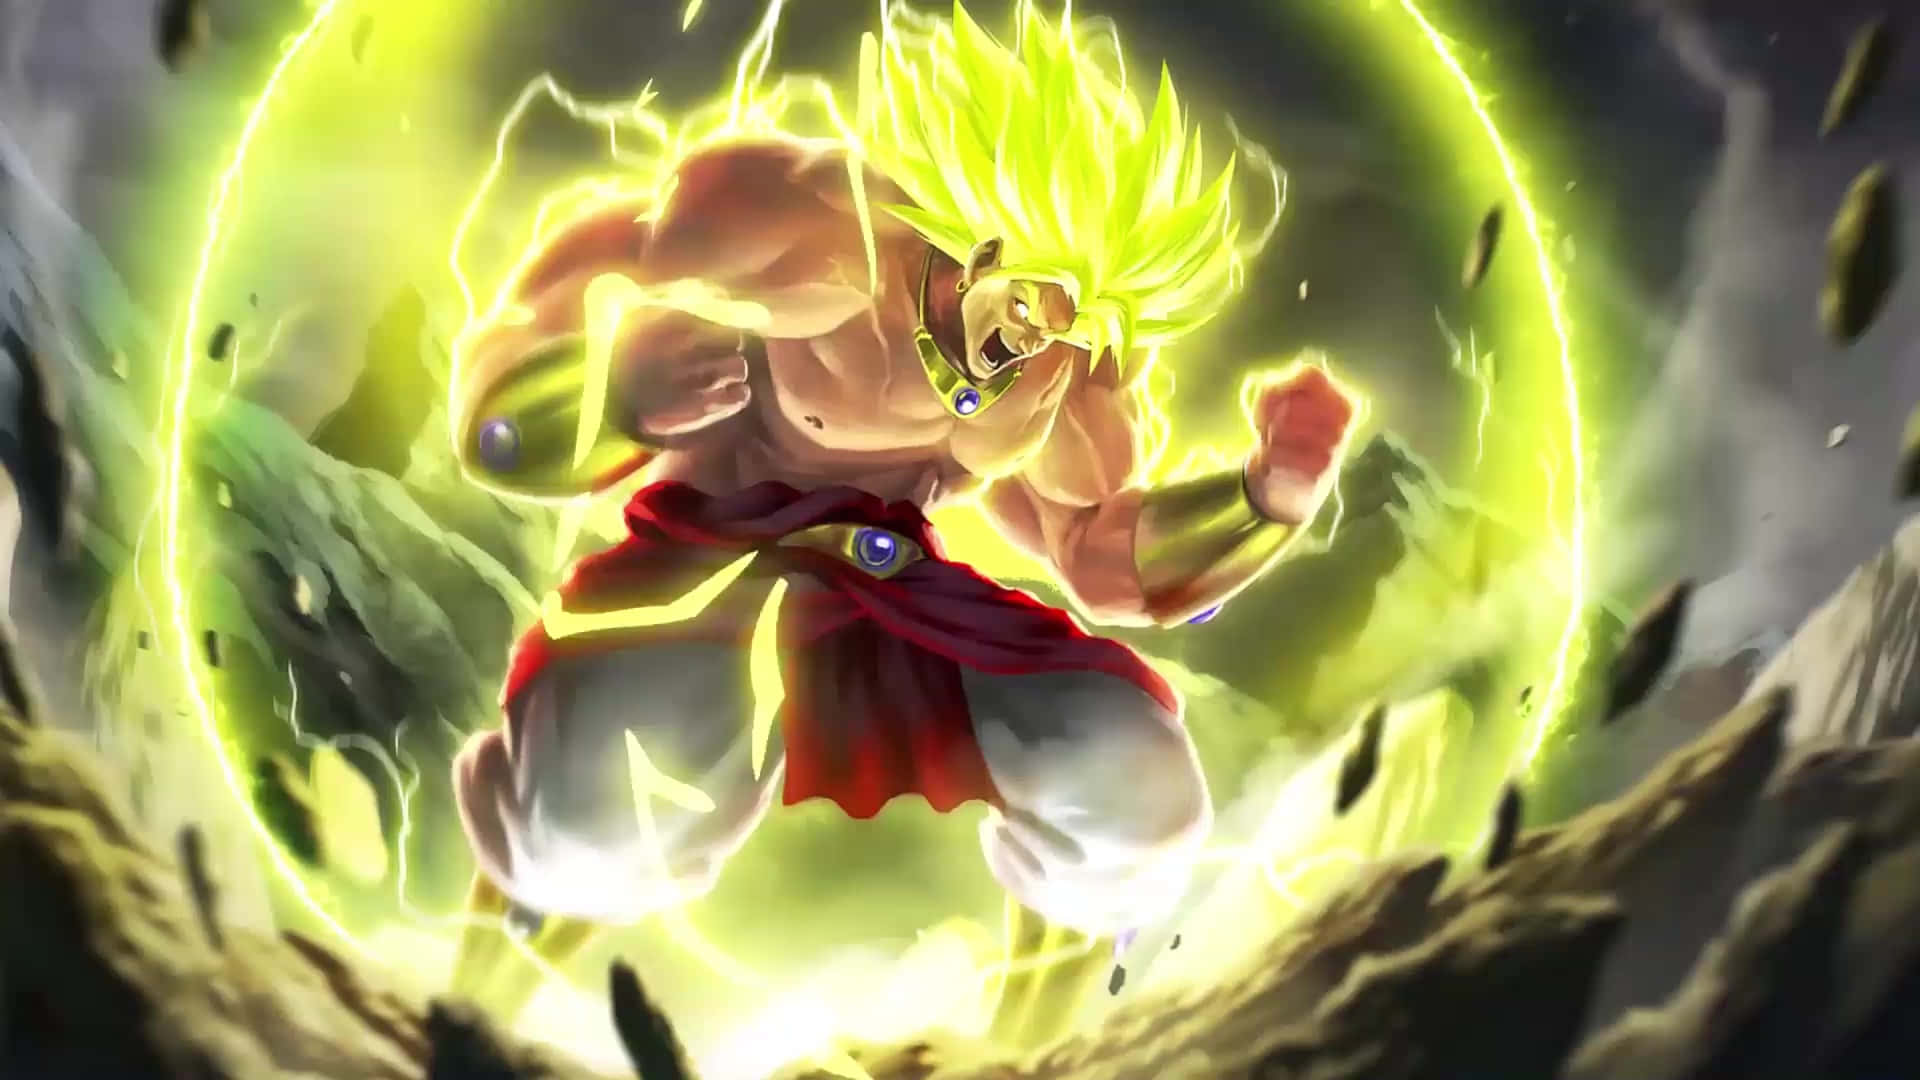 Witness the epic battle between Super Saiyan Broly and Goku in Dragon Ball Super: Broly!